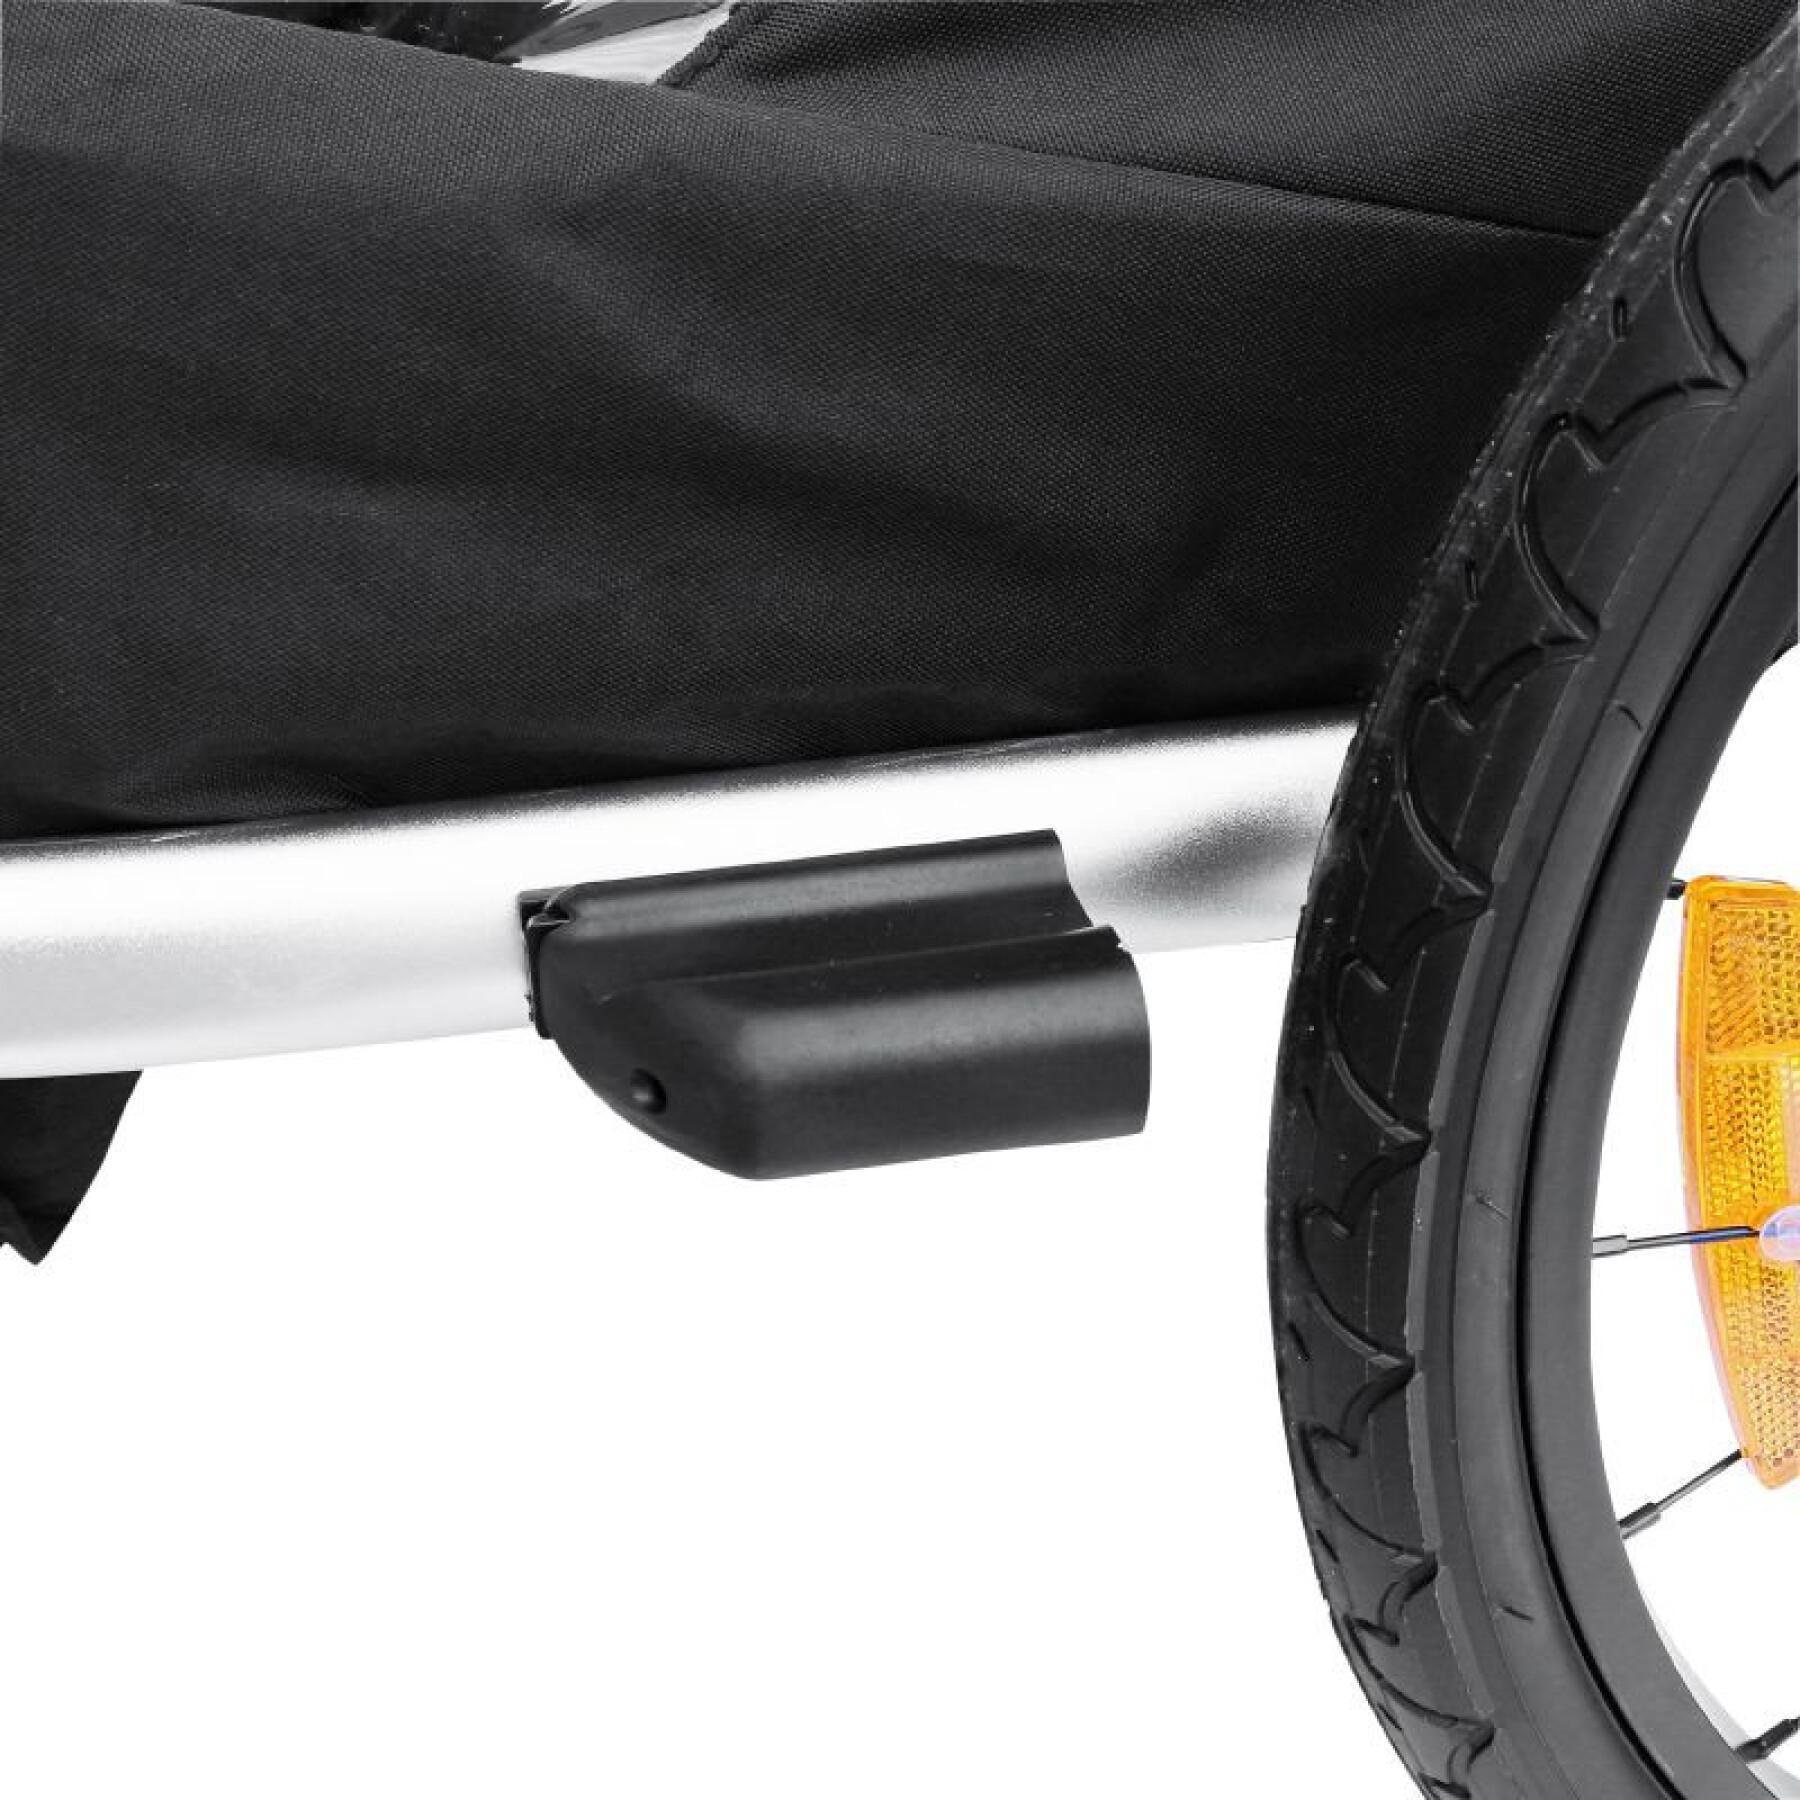 2 seater covered bicycle stroller trailer made of aluminium maxi wheel axle fixation - delivered with front wheel and brake handle - foldable without tools child P2R 36 Kg